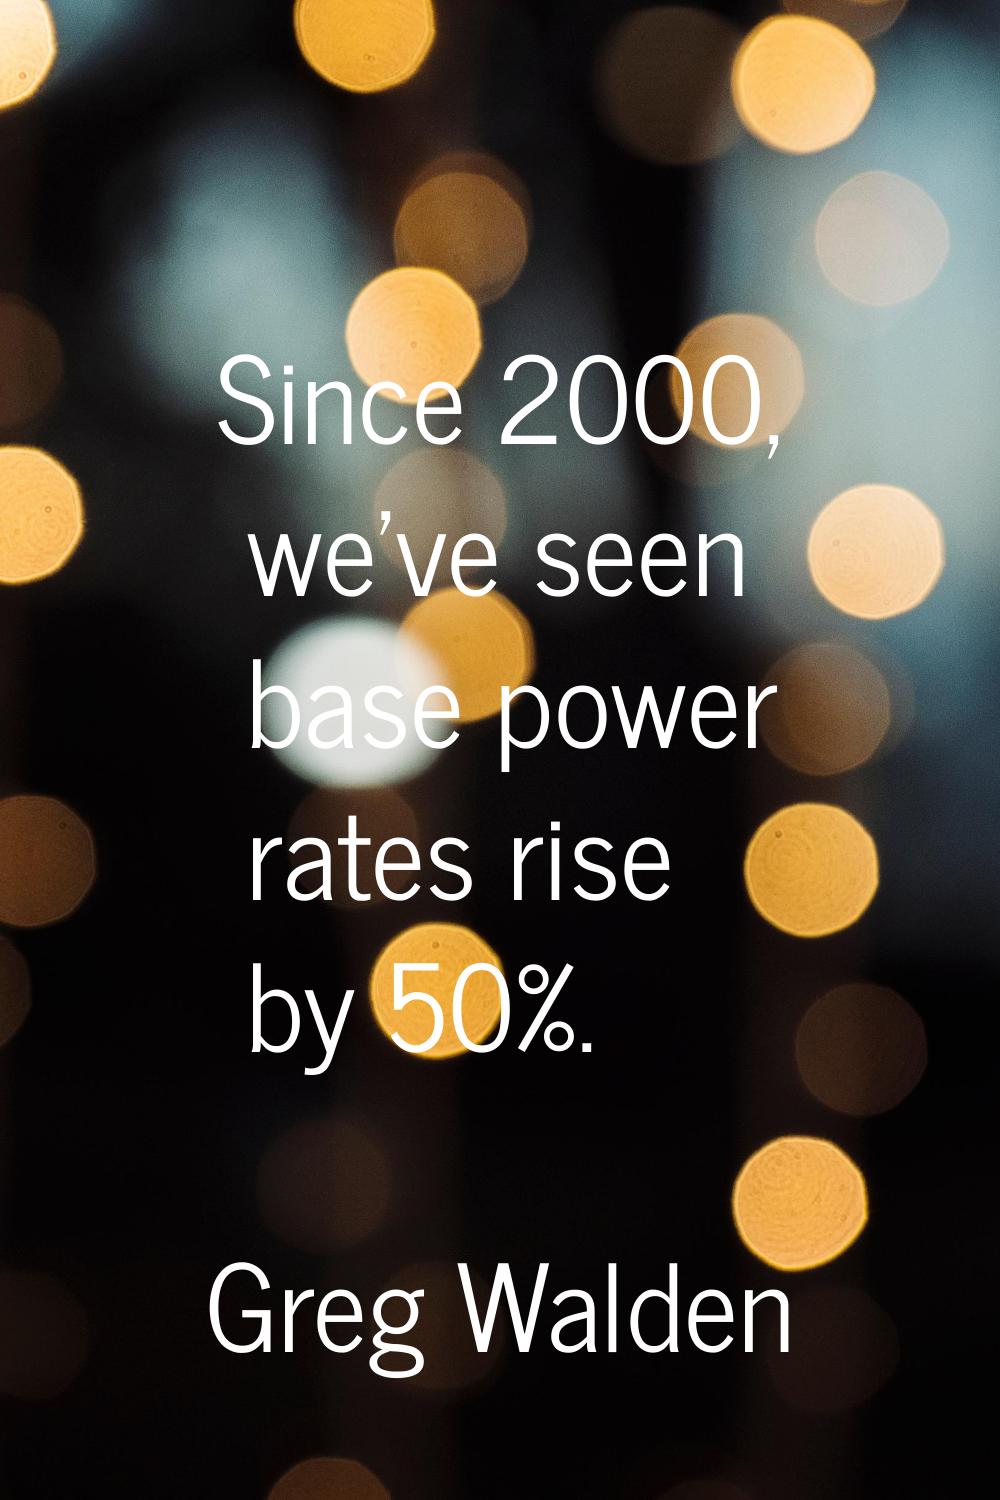 Since 2000, we've seen base power rates rise by 50%.